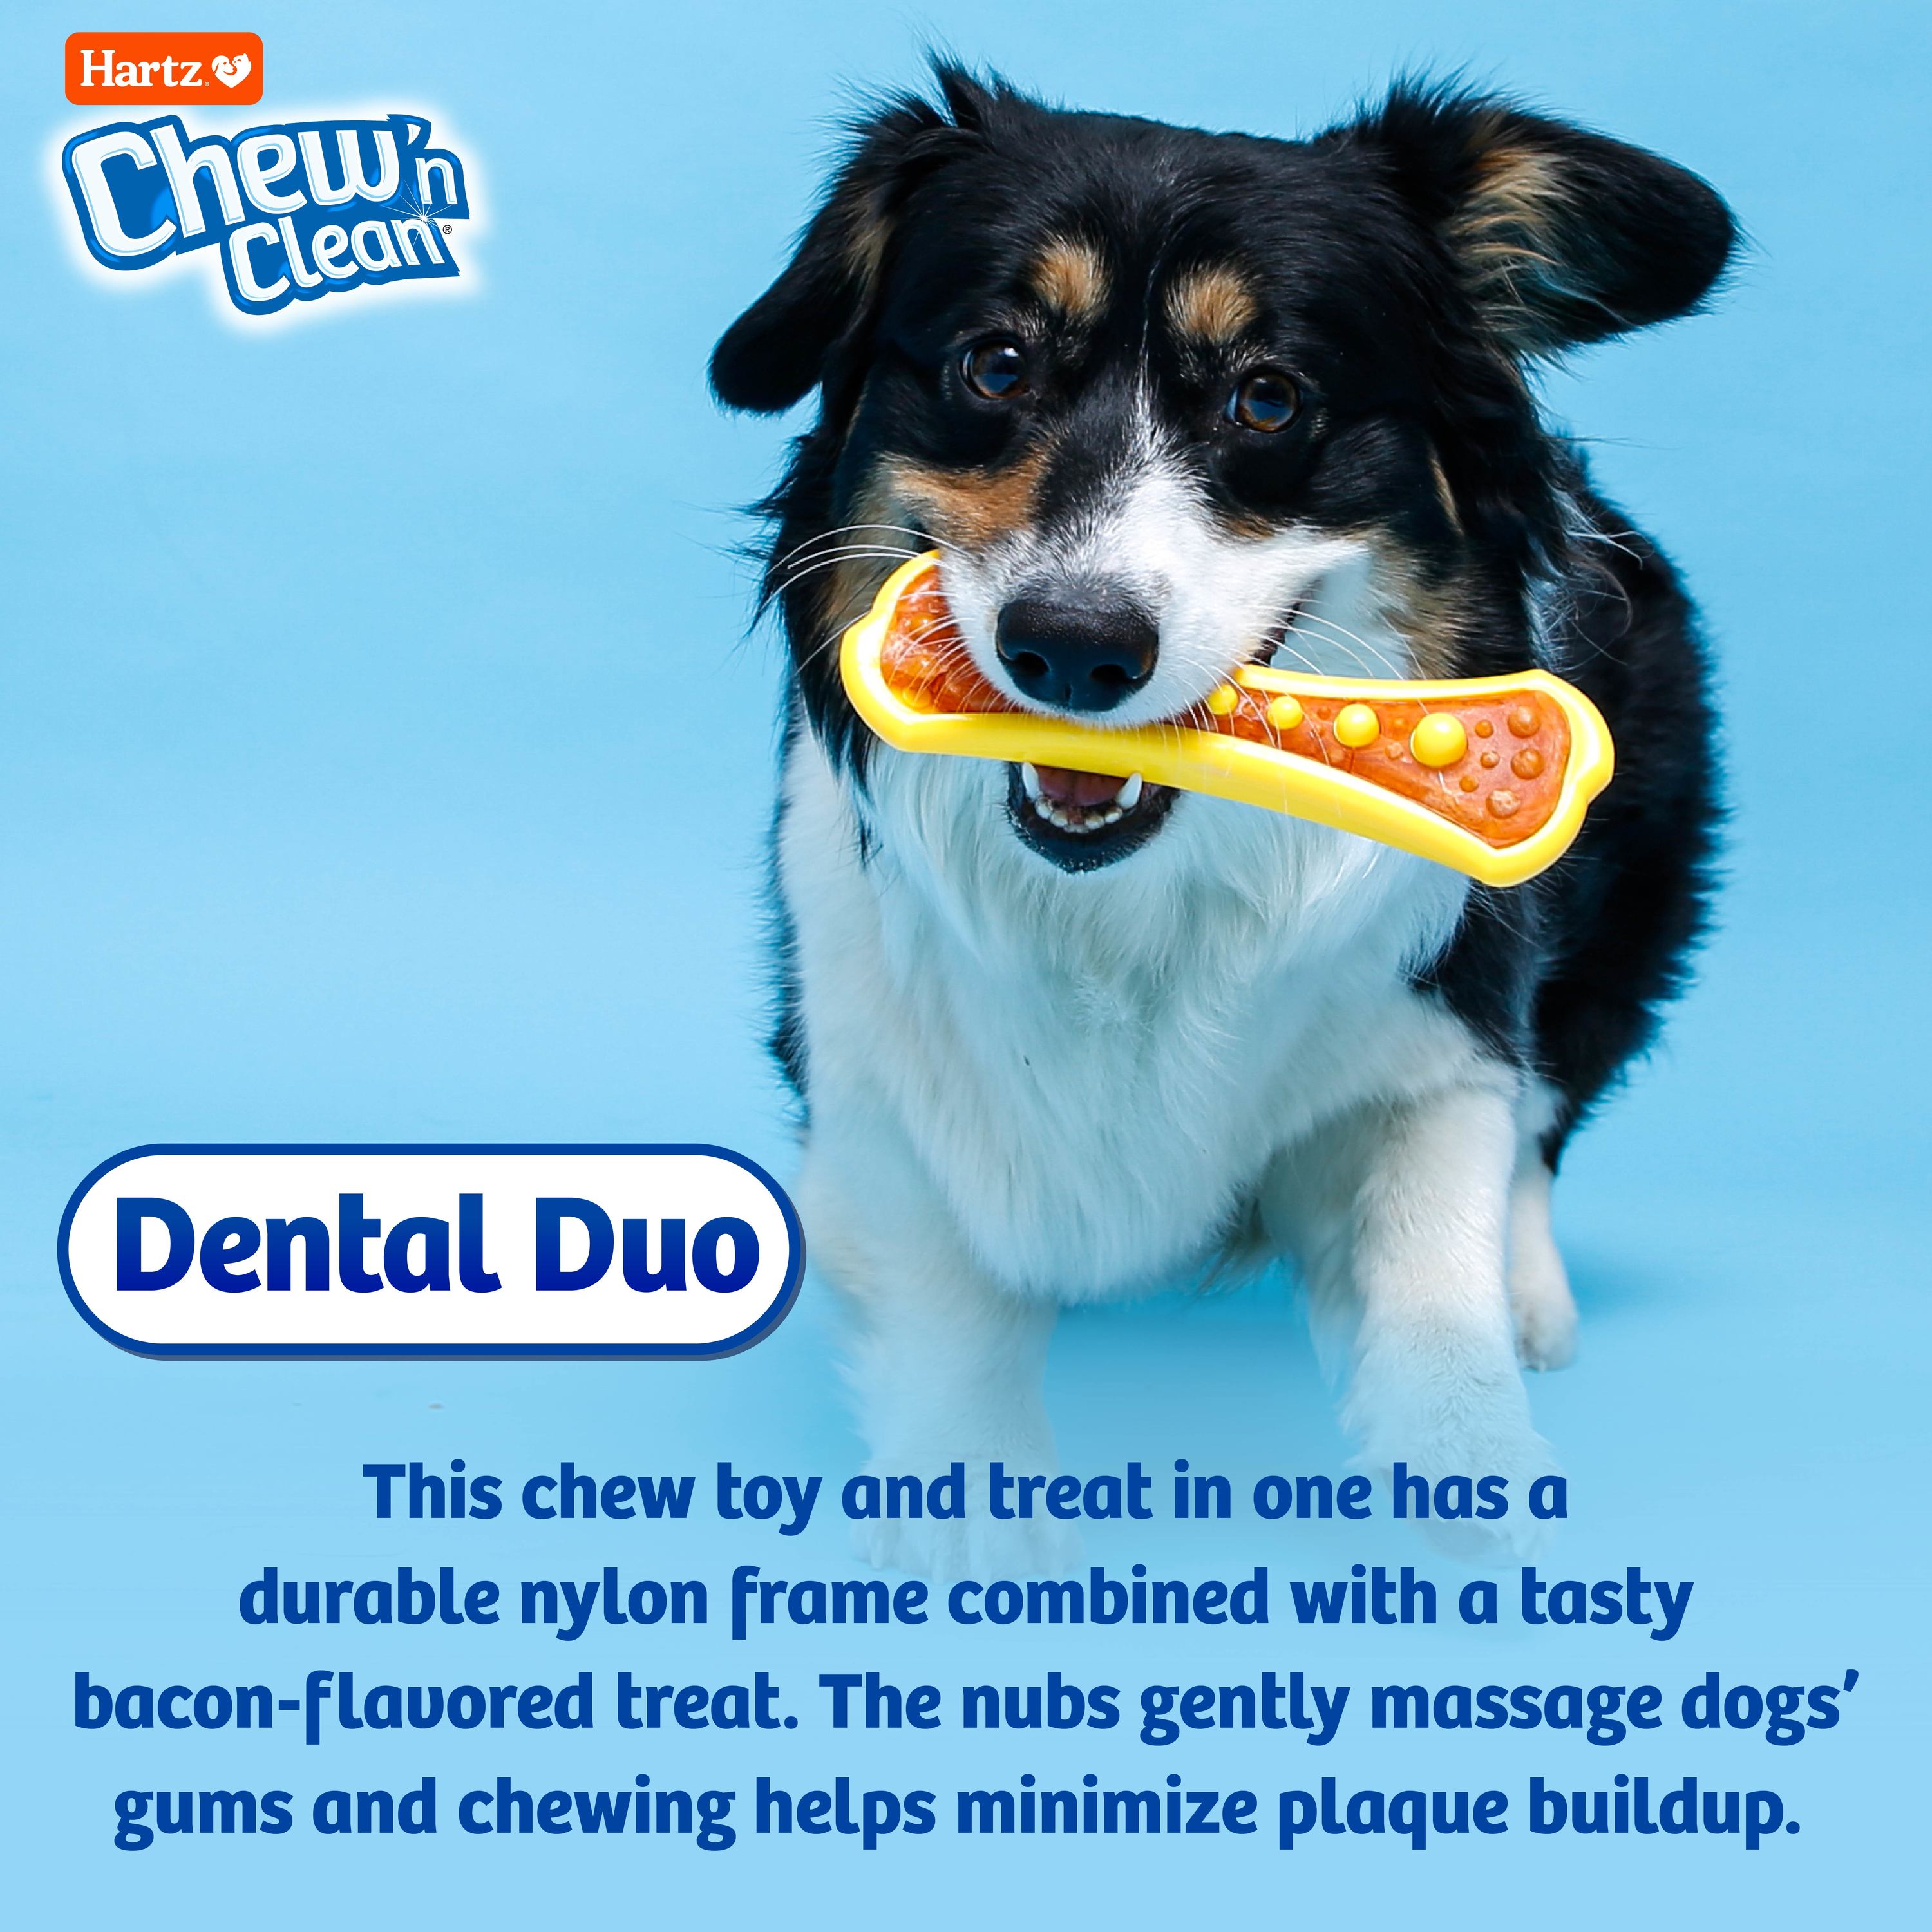 Hartz Chew 'n Clean Dental Duo Dog Toy, Medium, Color May Vary - image 5 of 8